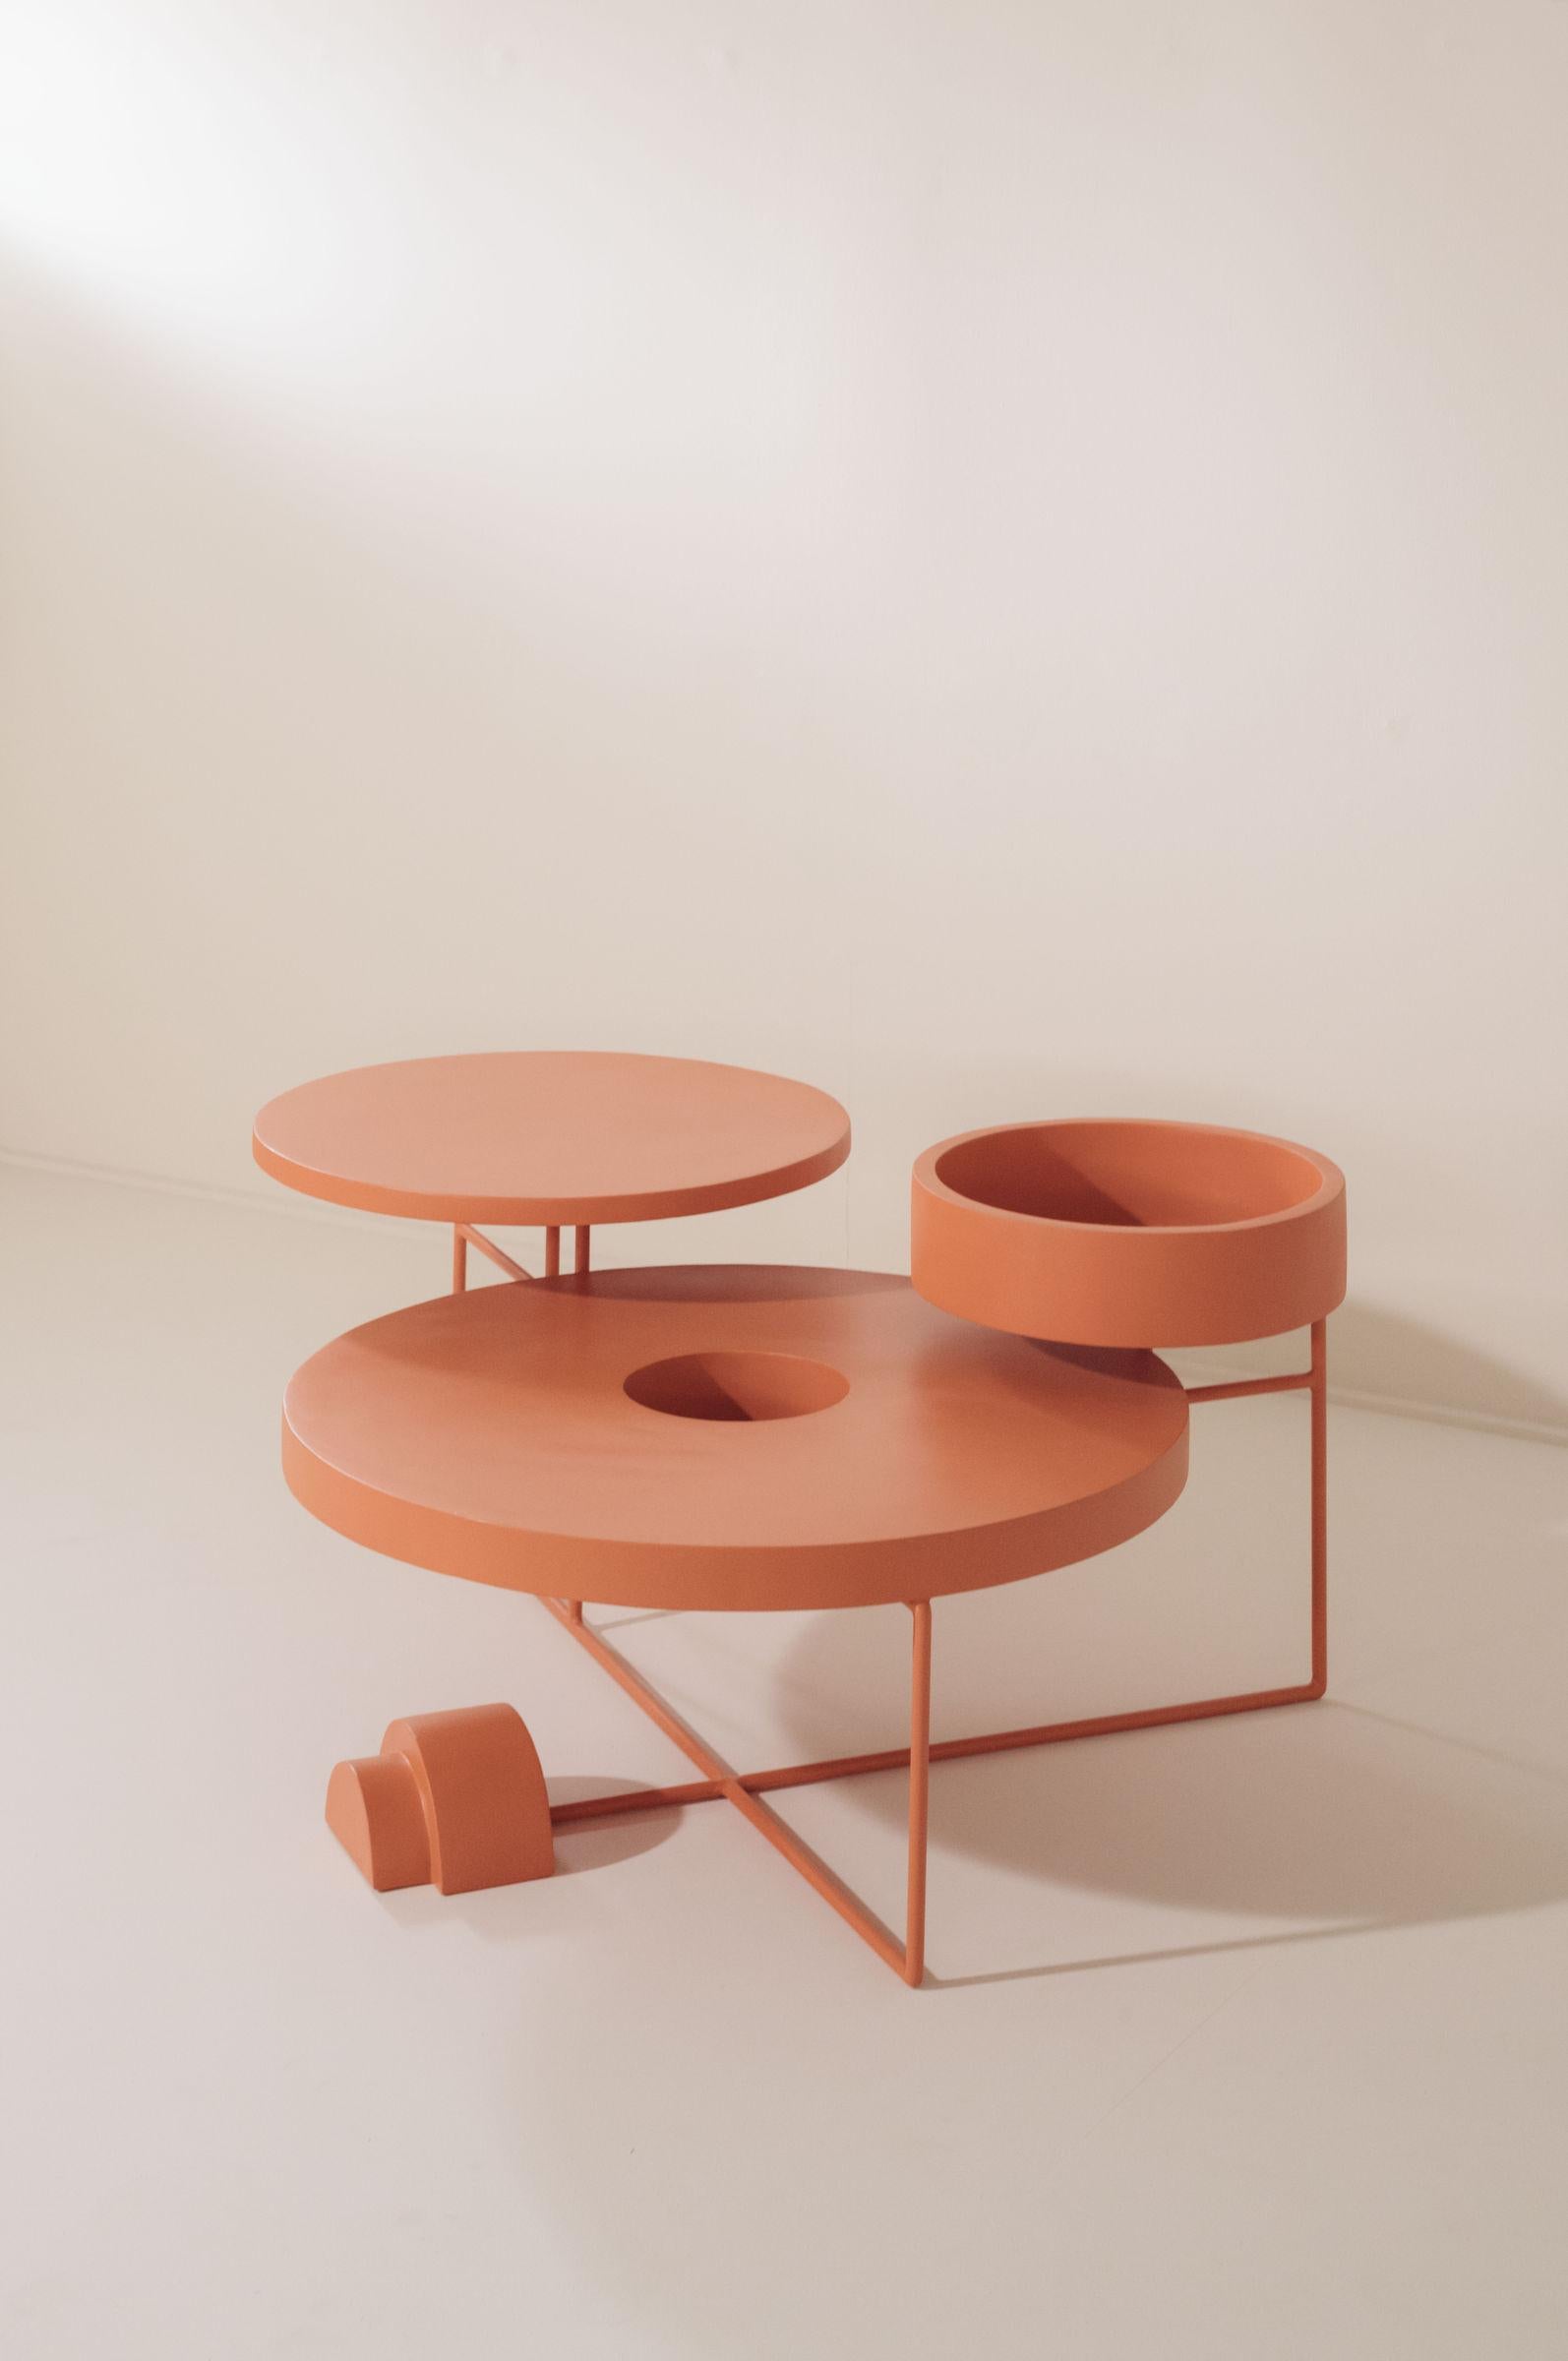 Post-modern coffee table and sculpture in terracotta lacquered metal handmade in Panama by Fi - Sofia Alvarado.

BRUTANTES Presents a series of functional sculptural objects created from the mixture, abstraction and transmutation between everyday